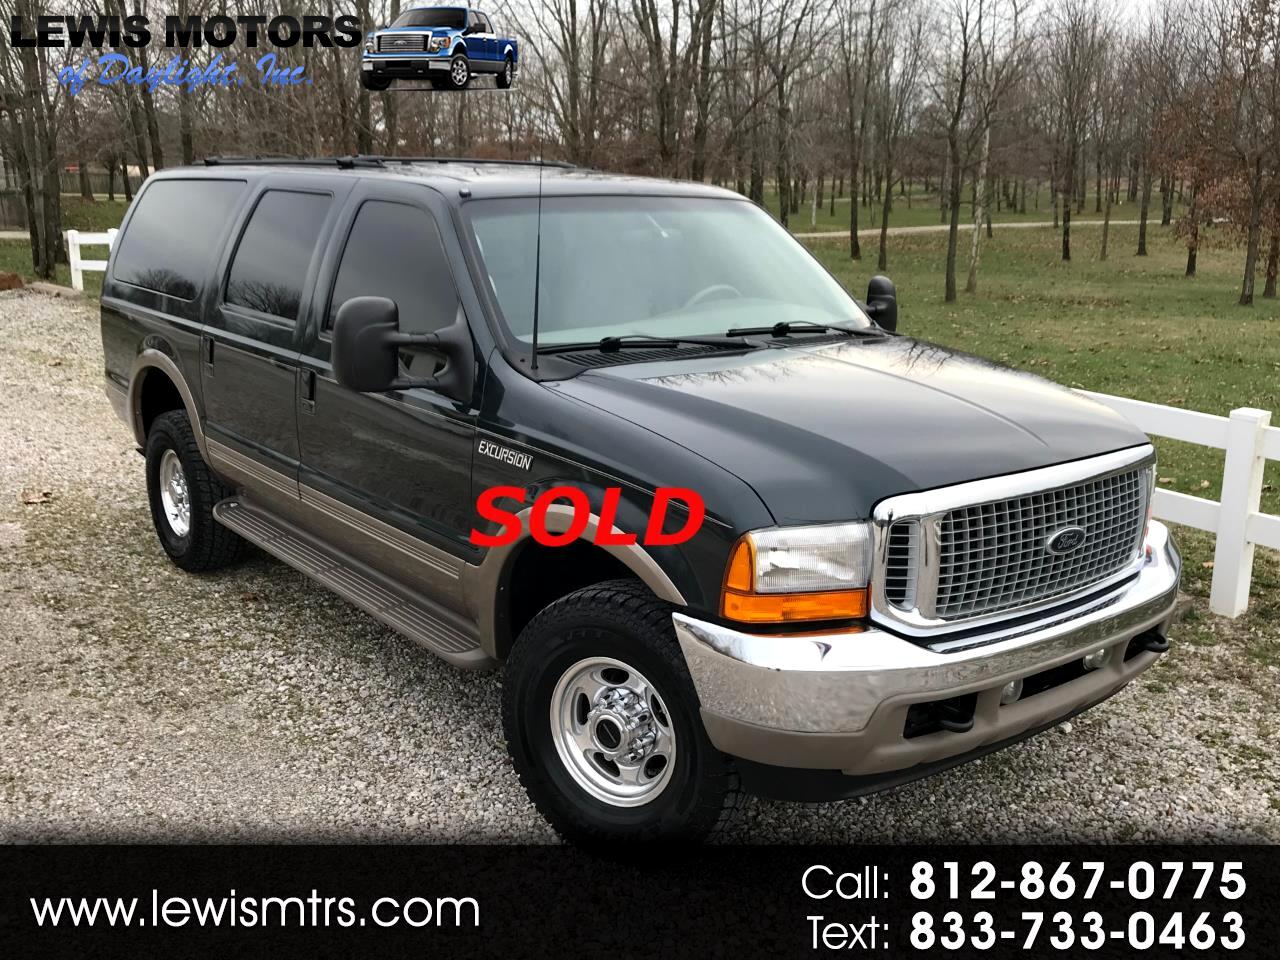 2001 FORD EXCURSION LIMITED